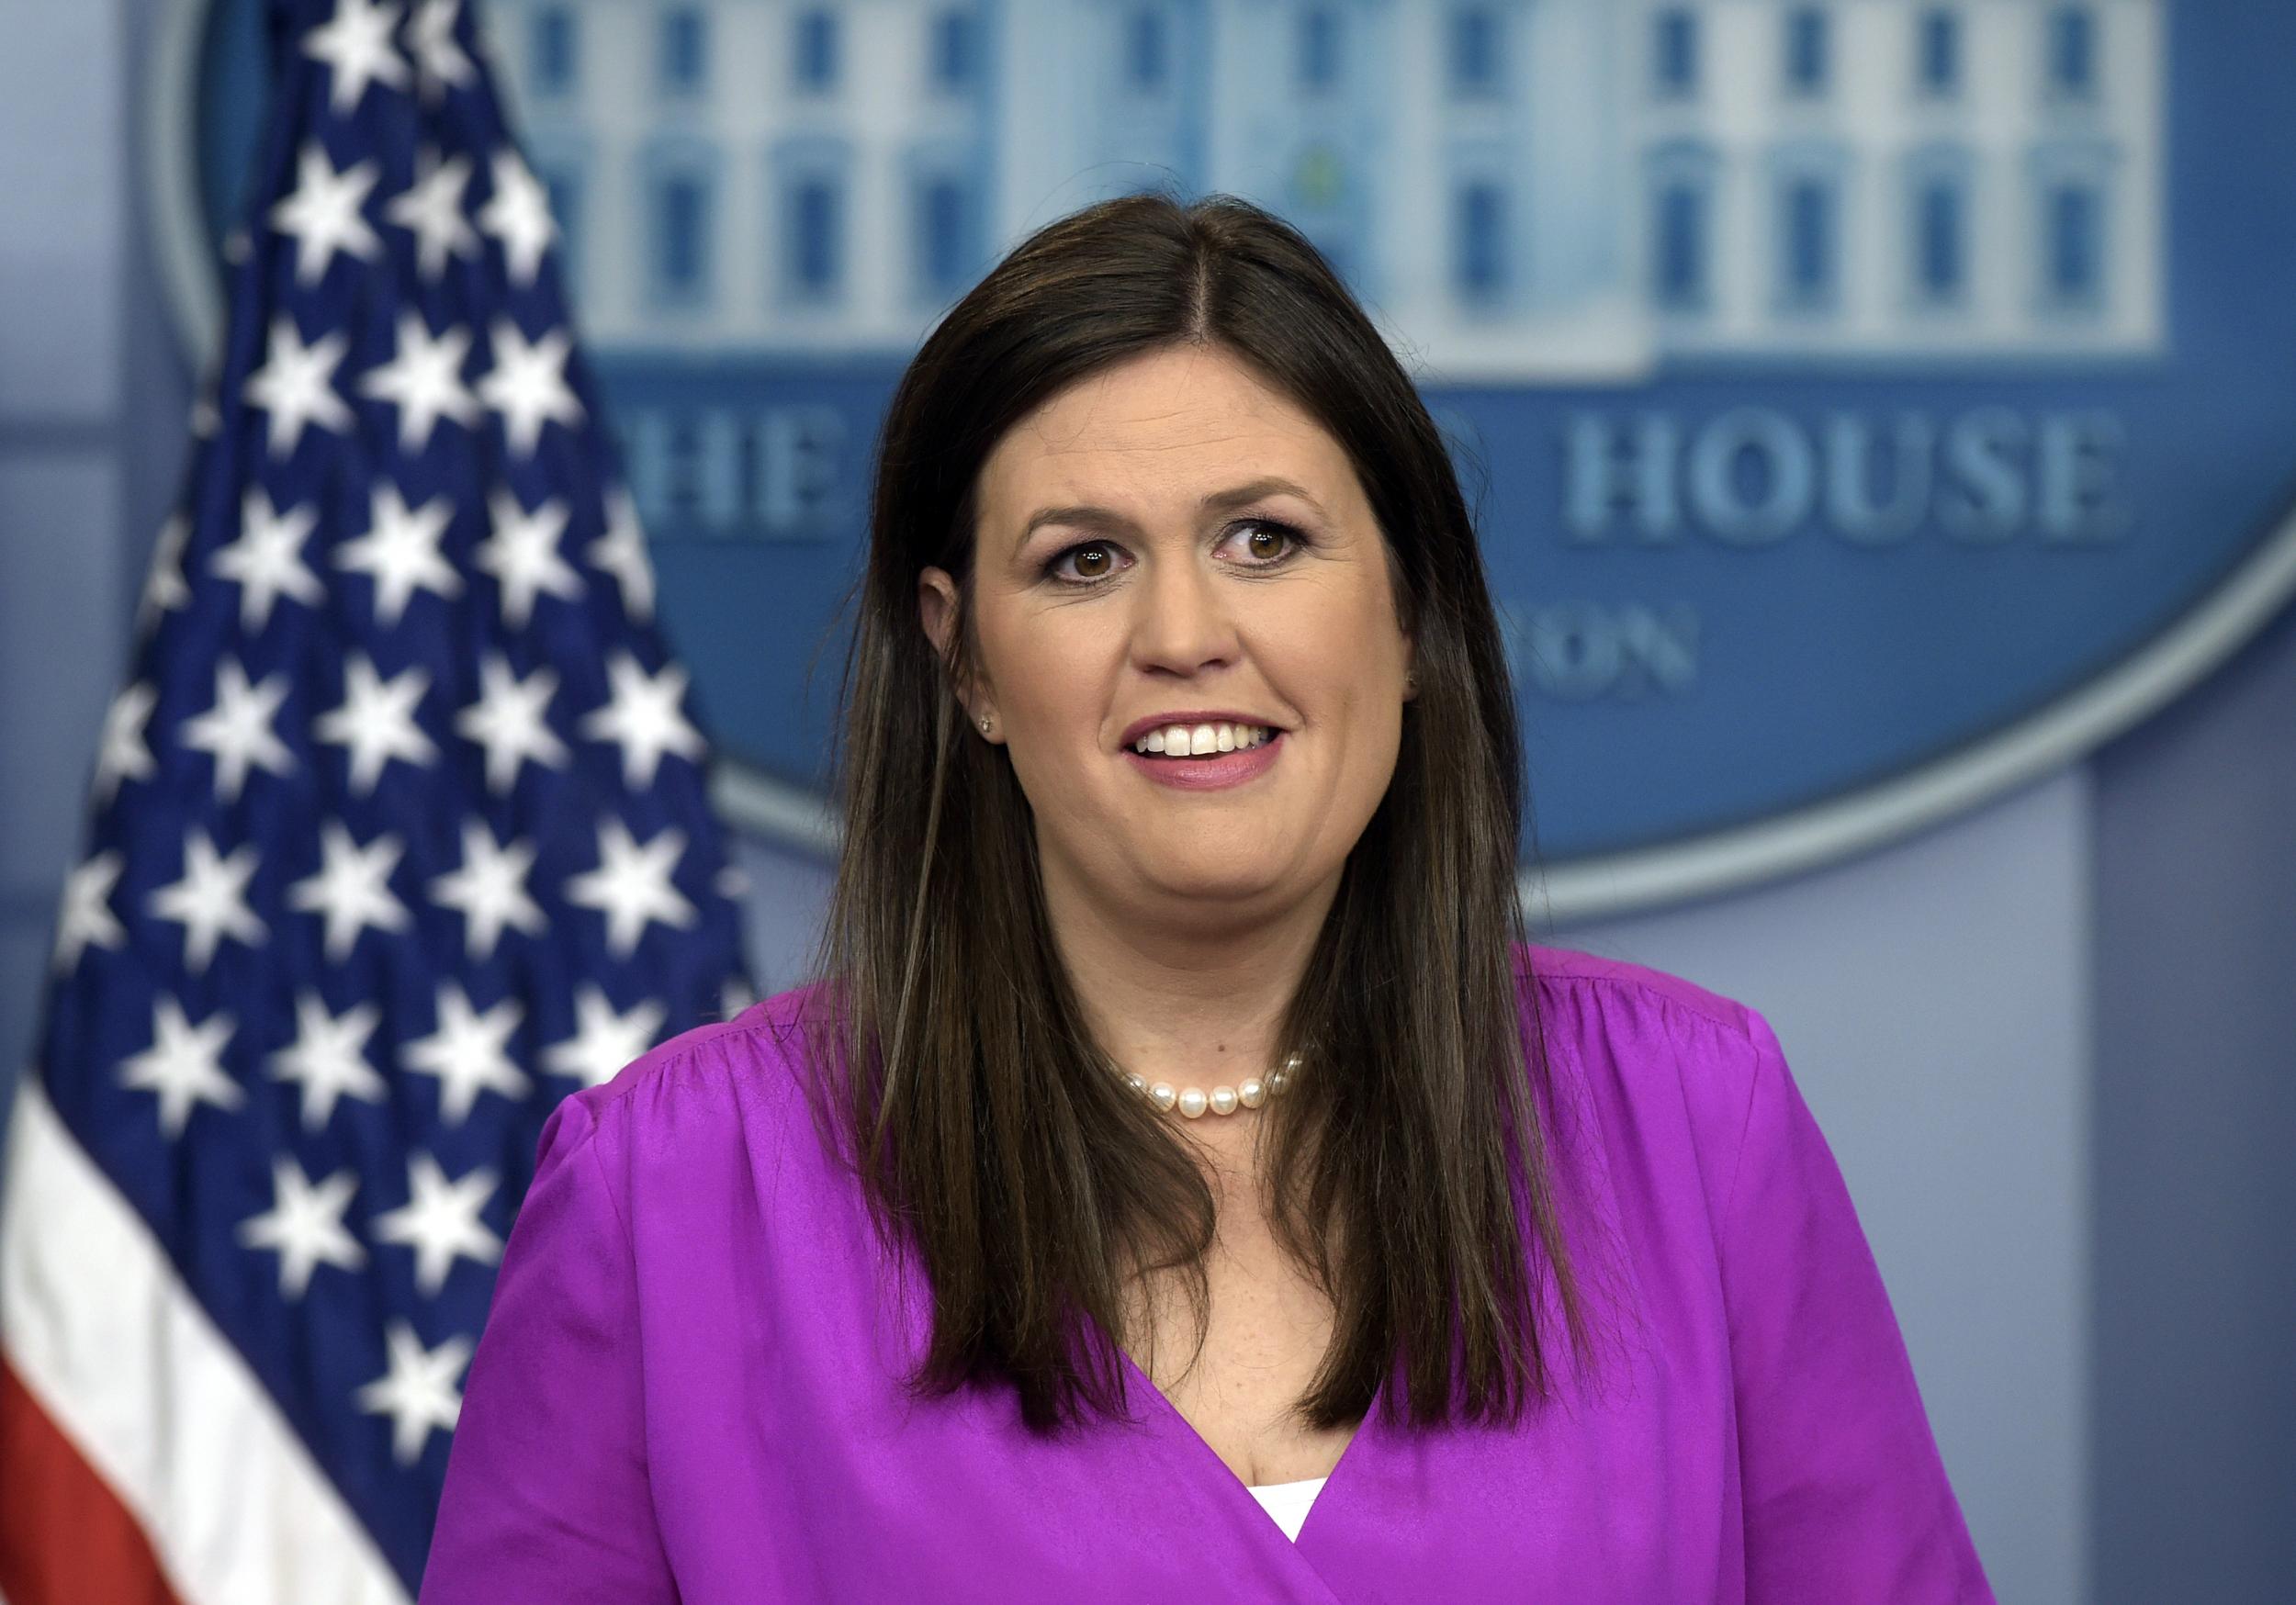 Ms Sanders says she thinks Mr Trump will be easily reelected